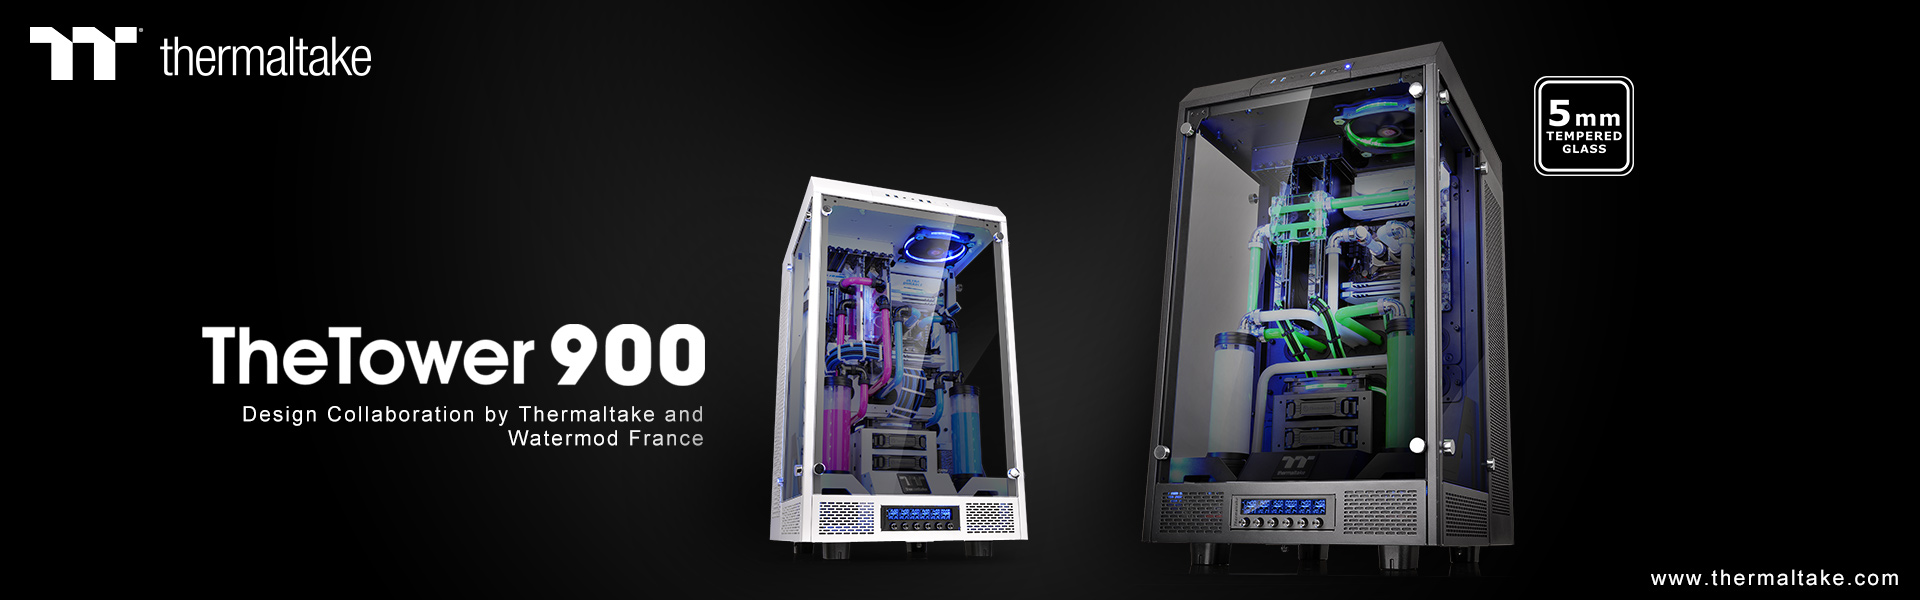 thermaltake new the tower 900 e atx vertical super tower chassis series Thermaltake เปิดตัวเคสแนวตั้งสองรุ่นใหม่ล่าสุด The Tower 900 E ATX Vertical Super Tower Chassis Series และ The Tower 900 Snow Edition E ATX Vertical Super Tower Chassis 